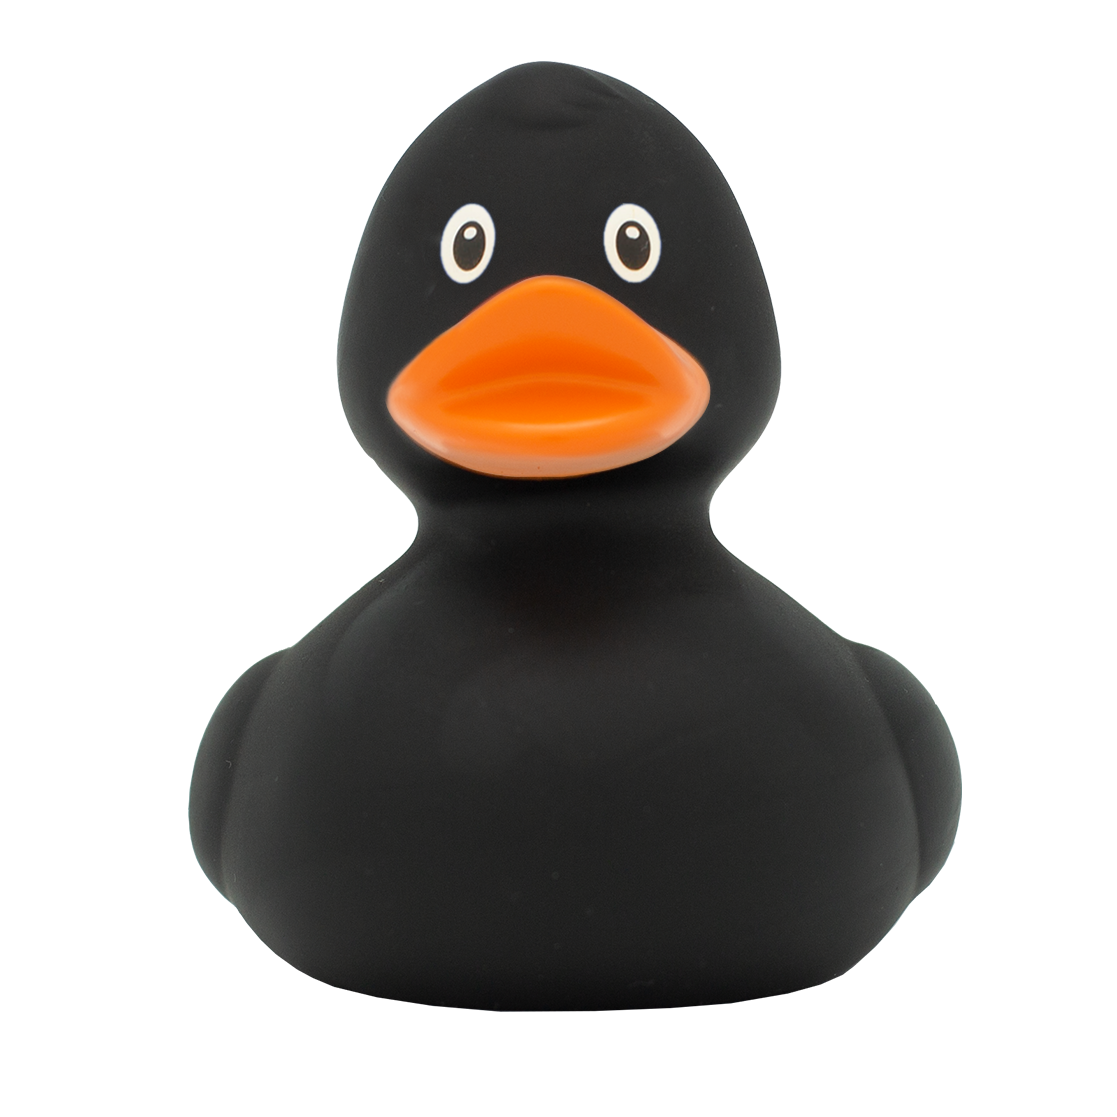 LILALU - SHARE HAPPINESS - Black rubber duck | LILALU